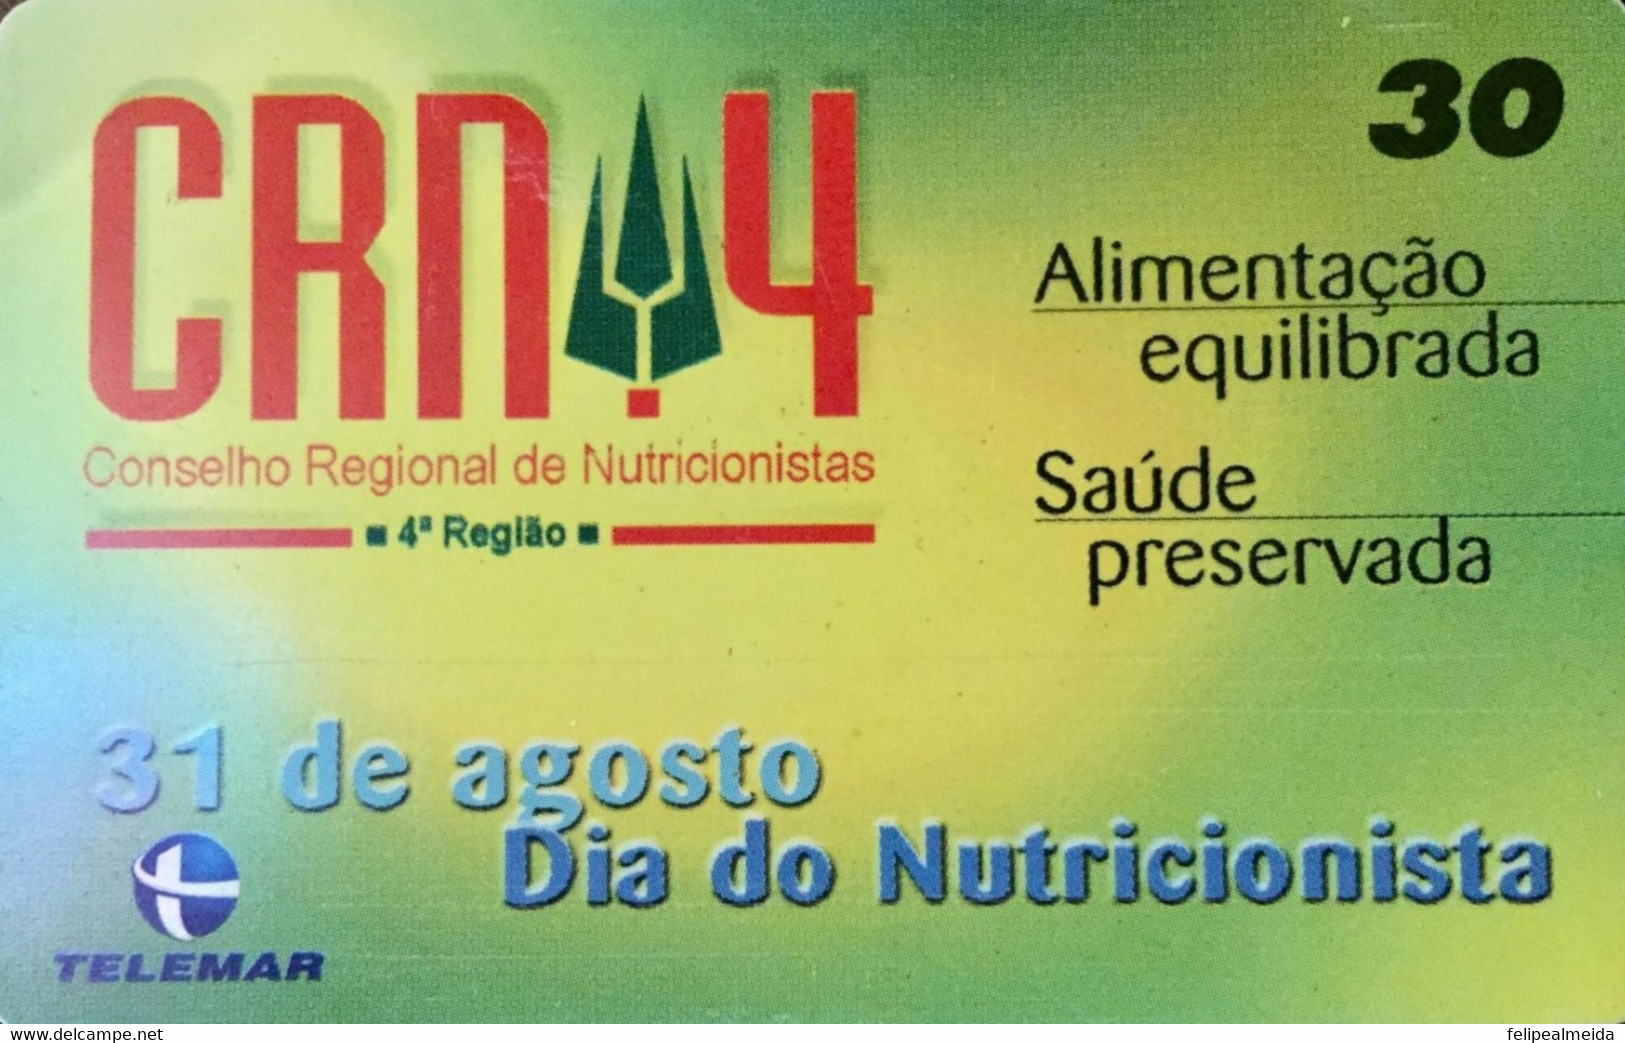 Phone Card Manufactured By Telemar In 1999 - Homage To The Nutritionist Day Celebrated On 31 August - Lebensmittel